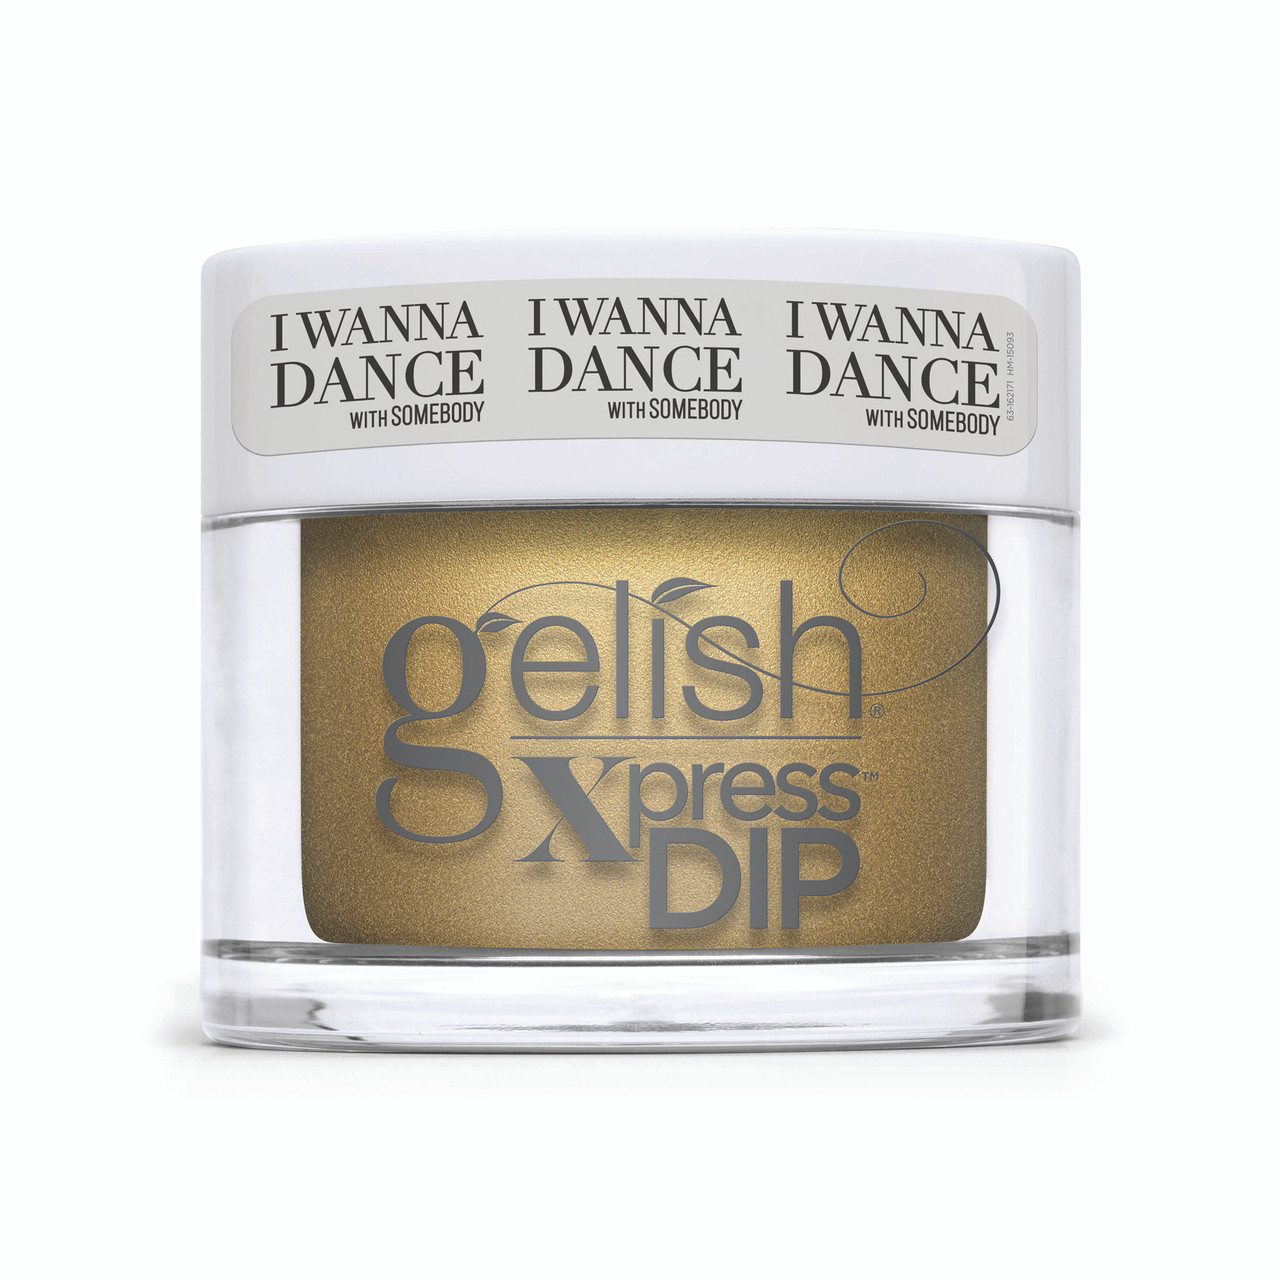 Gelish Dip Powder Xpress - 1620475 - Command The Stage